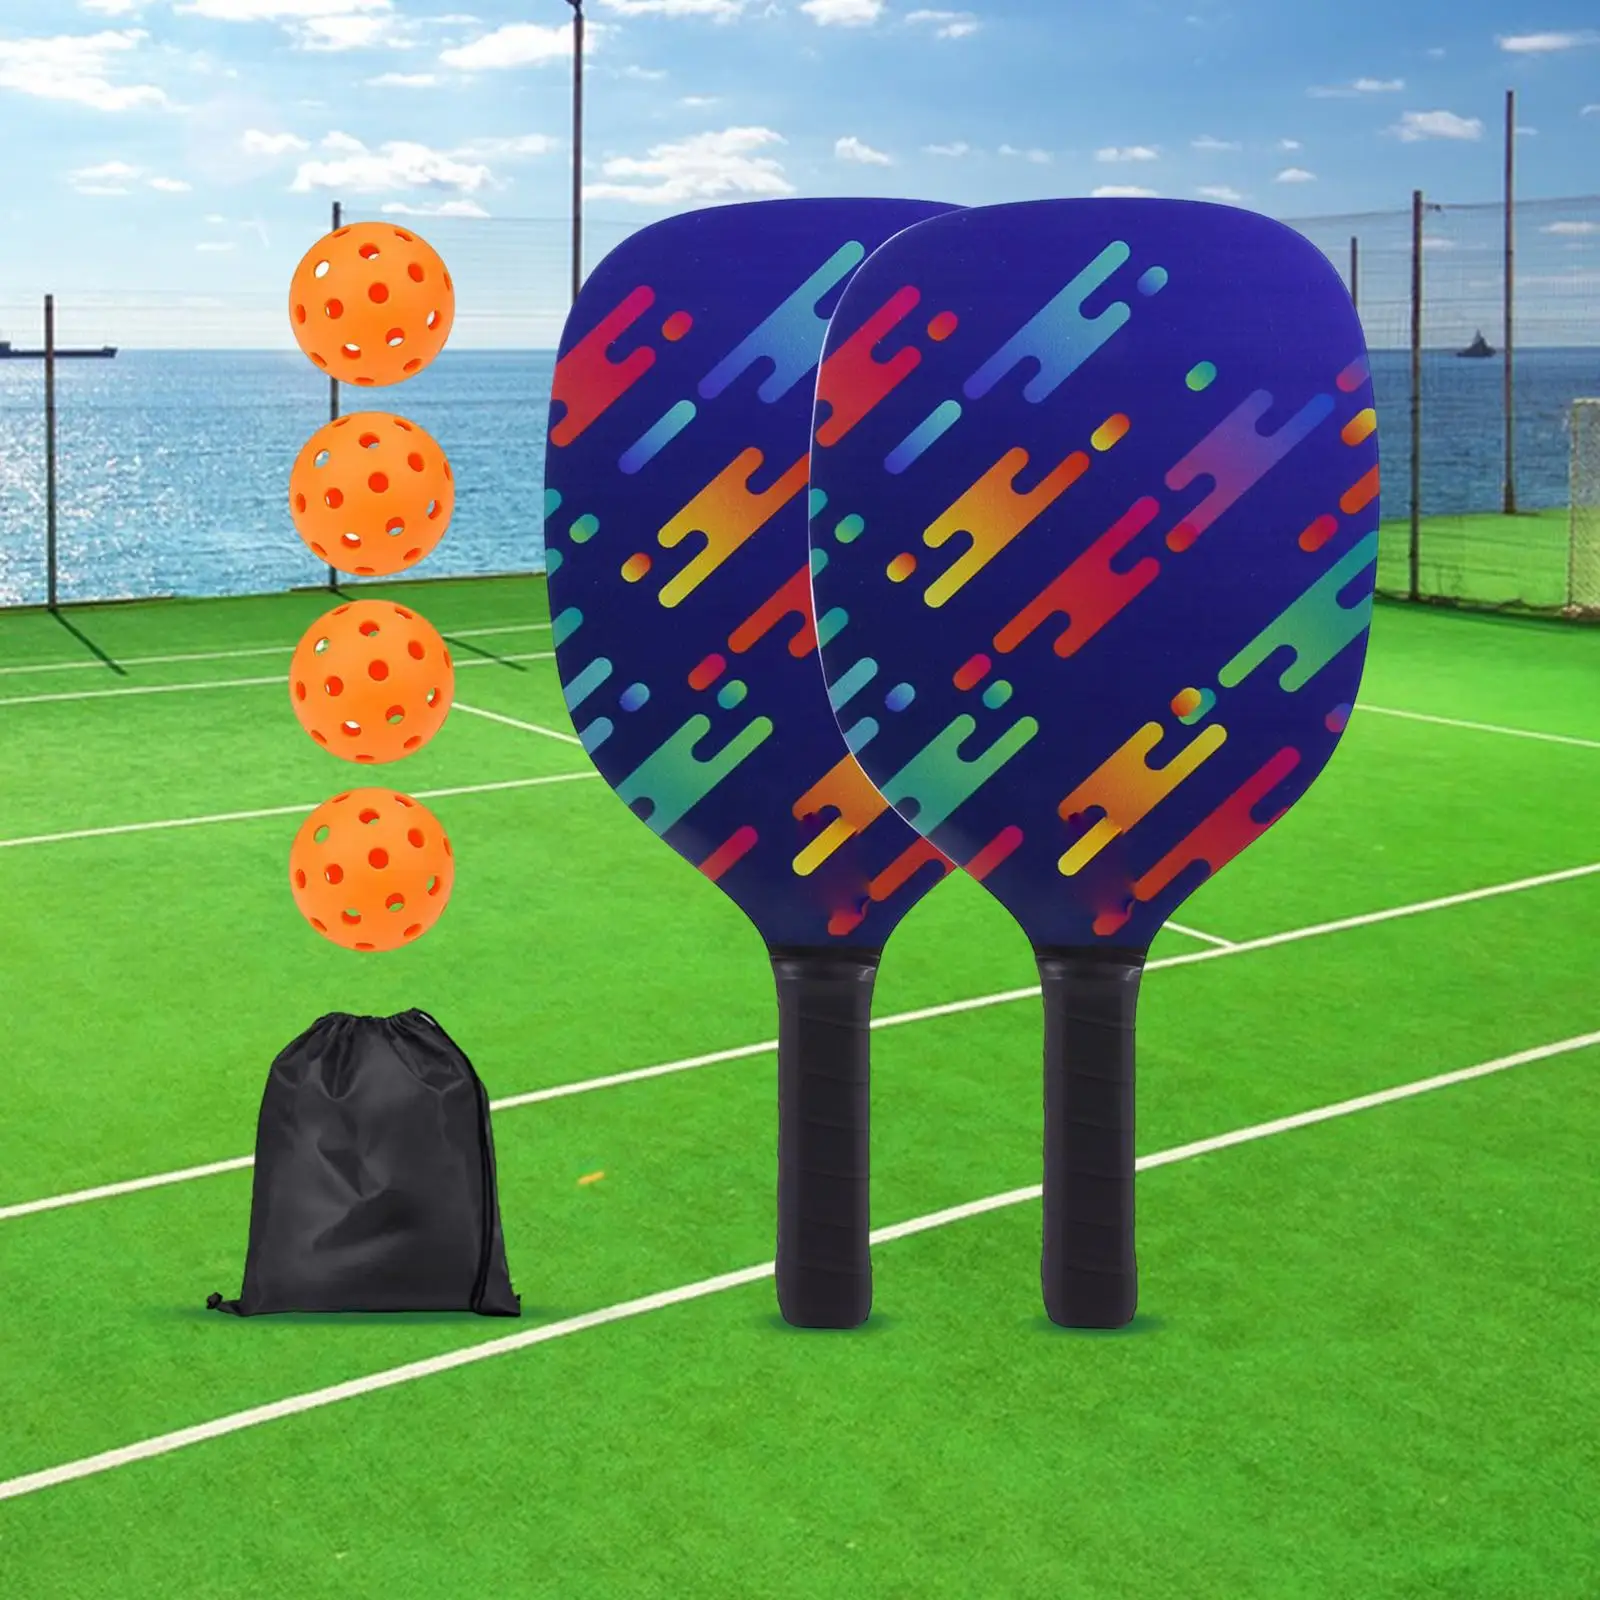 Professional Pickleball Paddle Racket 2 Rackets Carrying Bag 4 Balls Wood Lightweight for Equipment Outdoor Men Training Sports